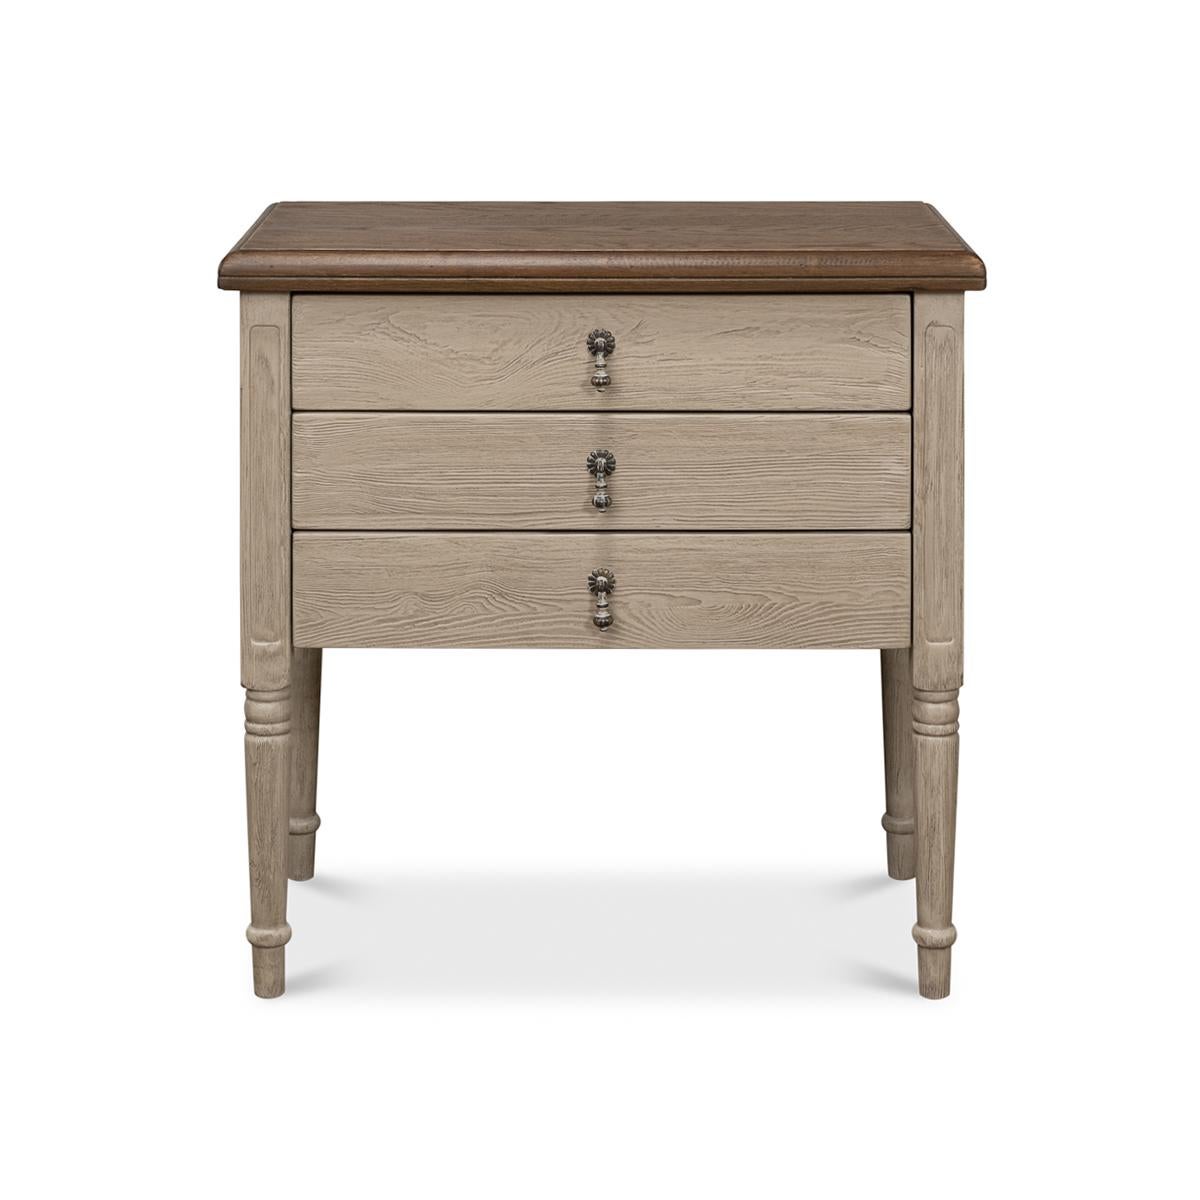 The perfect addition to any elegant and sophisticated bedroom or living space, this beautiful piece boasts a natural finish oak top with a molded edge, creating a sleek and refined look. The top is contrasted by a soft grey painted base that adds a